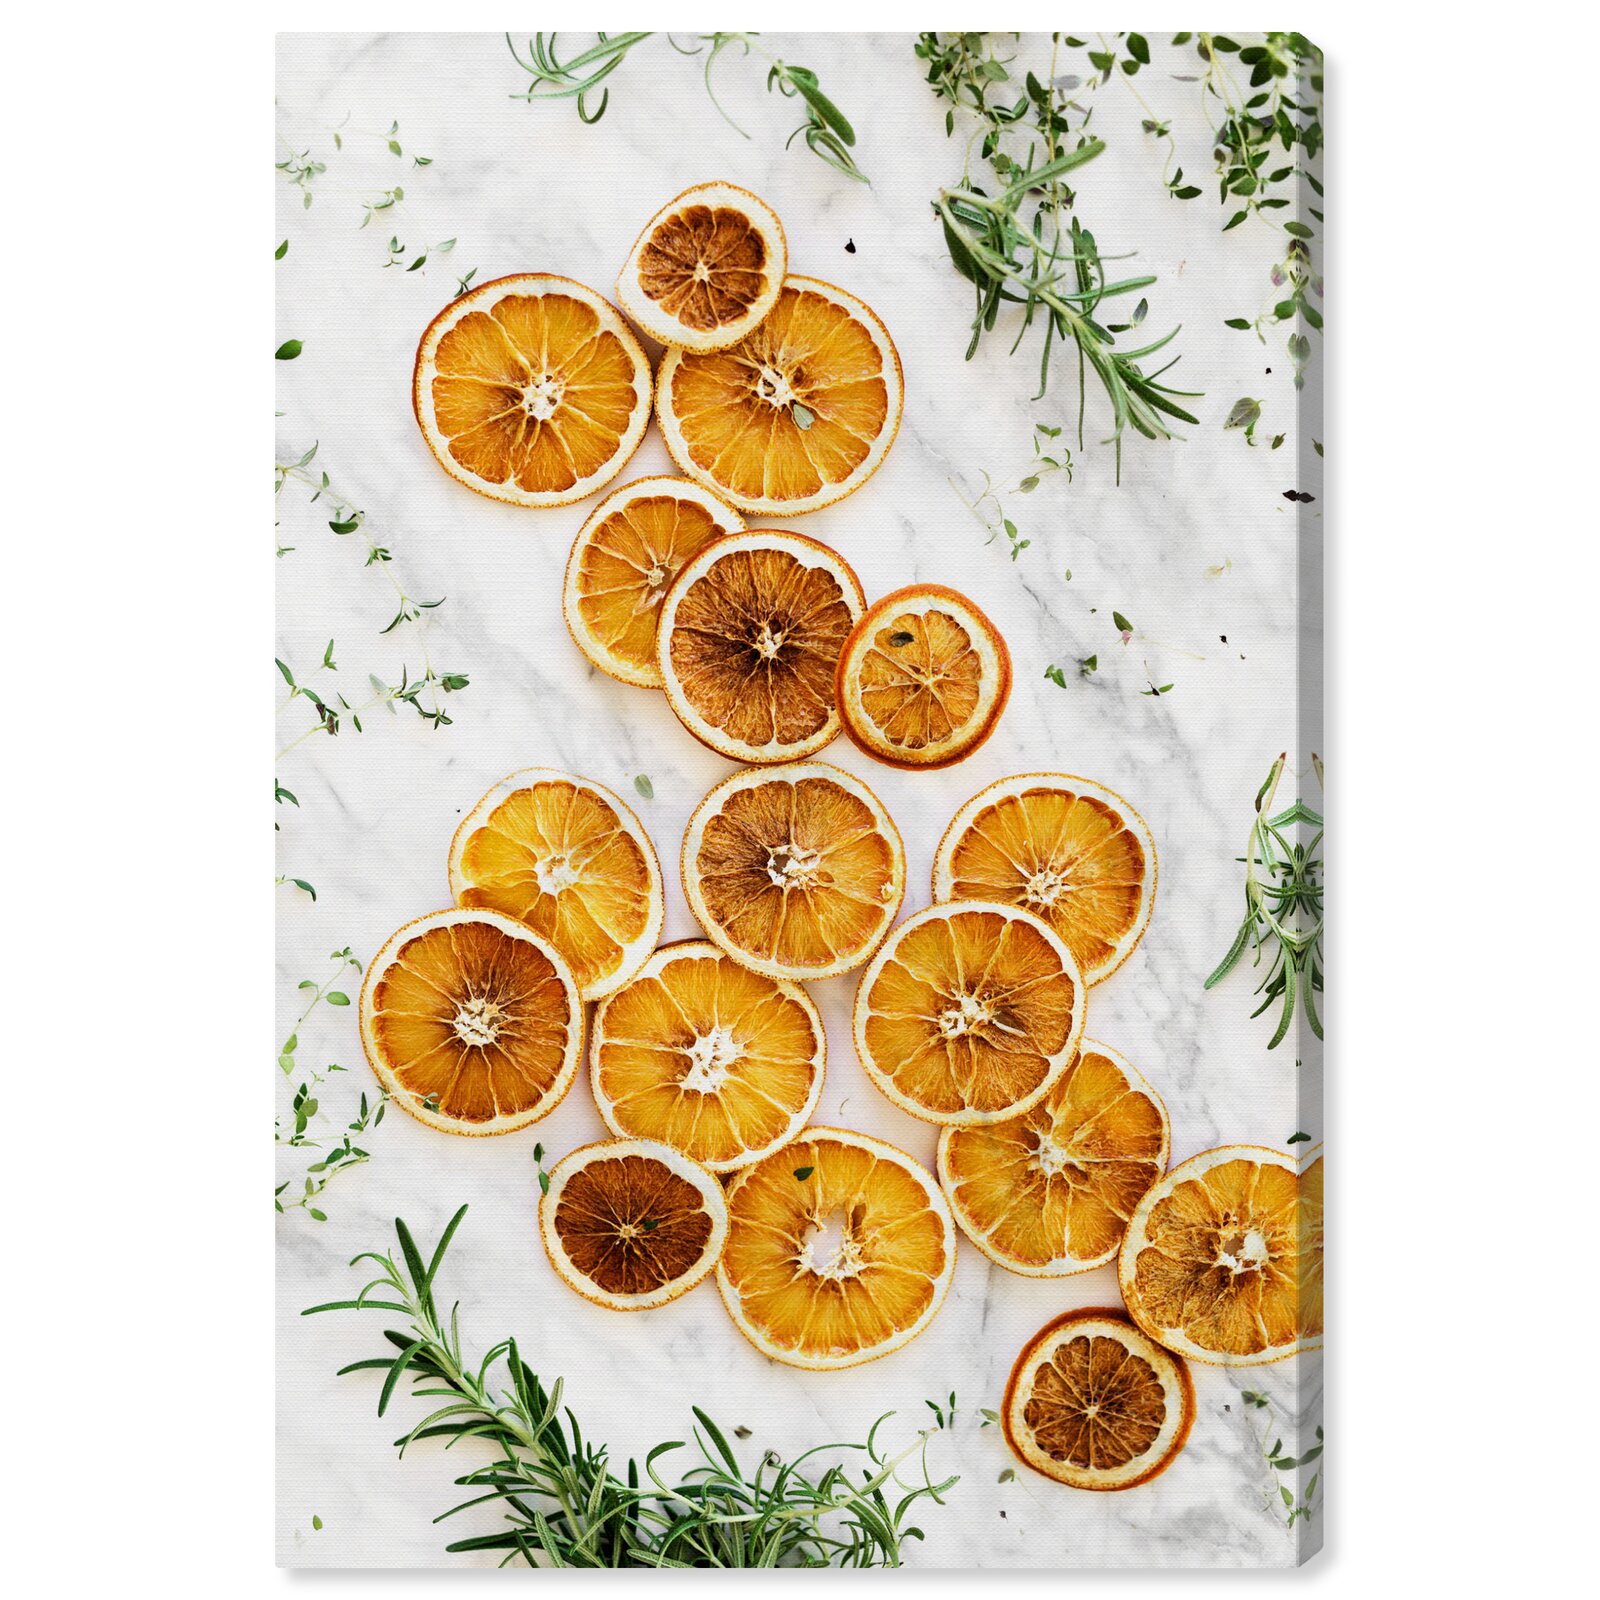 Food and Cuisine Citrus and Marble Fruits - Wrapped Canvas Photograph Print